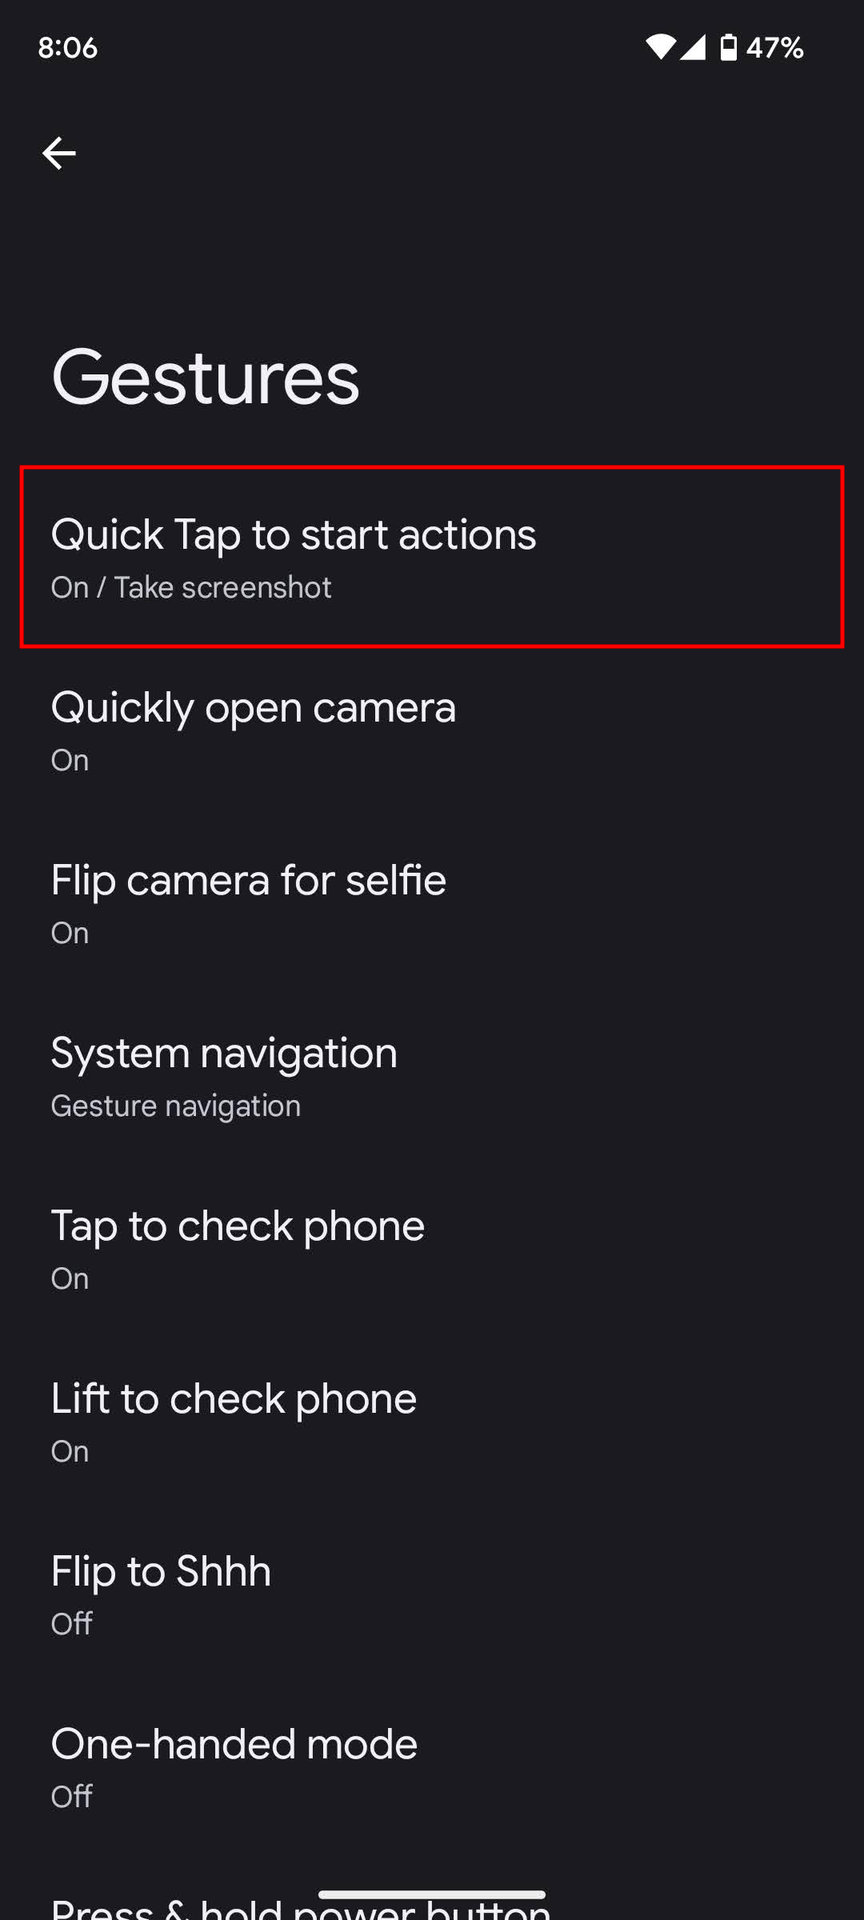 How to take a screenshot using the Quick Tap feature (3)